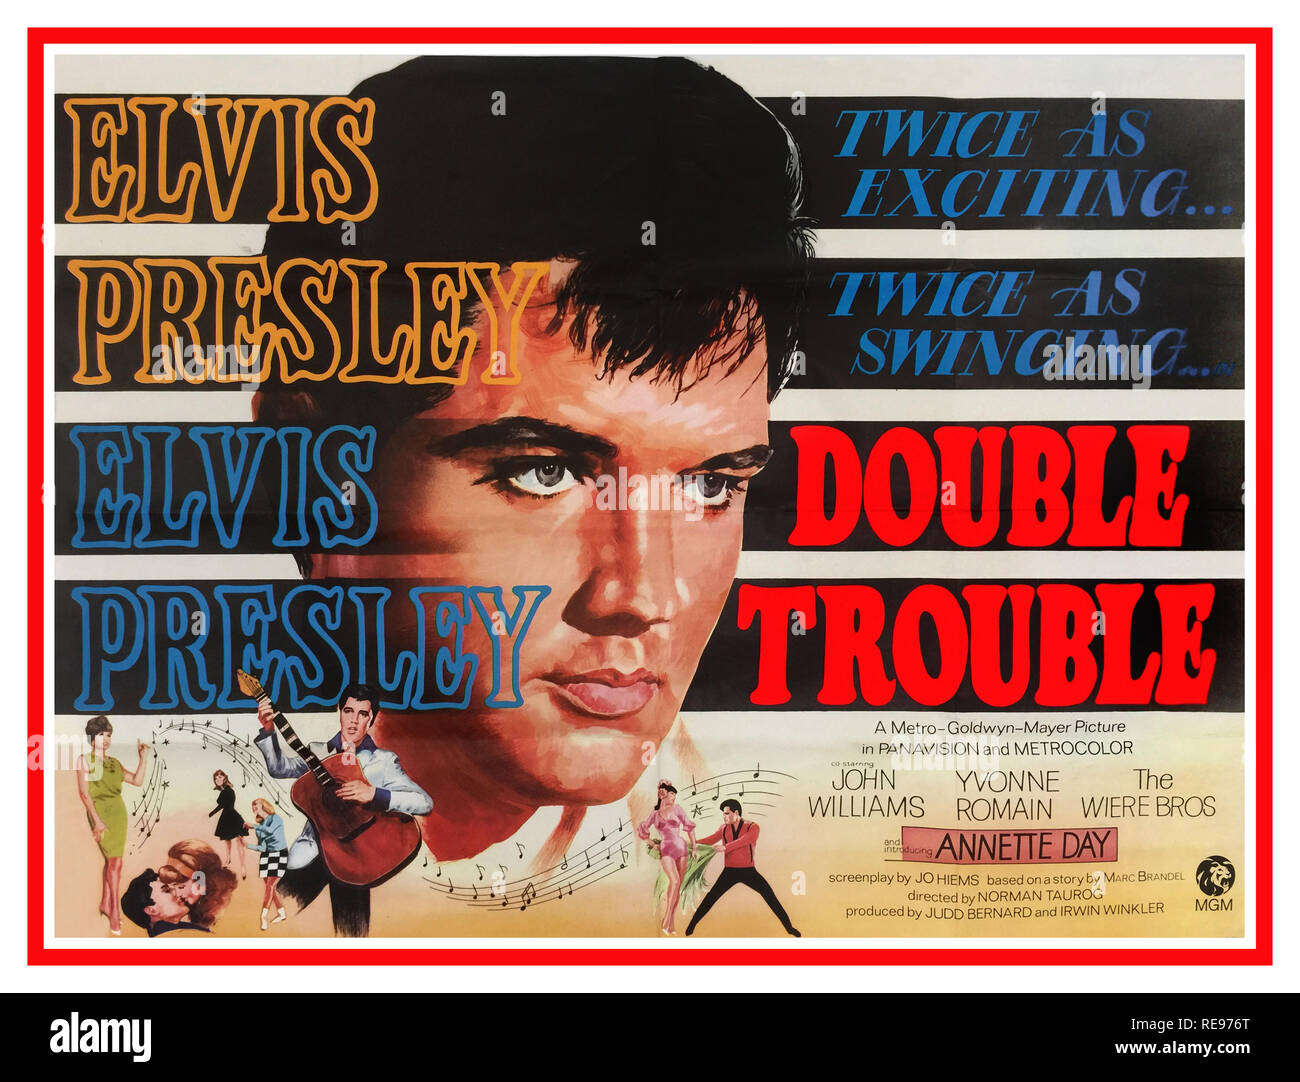 Vintage ELVIS PRESLEY MOVIE POSTER Double Trouble a 1967 American musical film starring Elvis Presley. The comedic plot concerns an American singer who crosses paths with criminals in Europe. StarringElvis Presley Annette Day Yvonne Romain The Were Bros John Williams Directed By Norman Taurog and produced by MGM Stock Photo